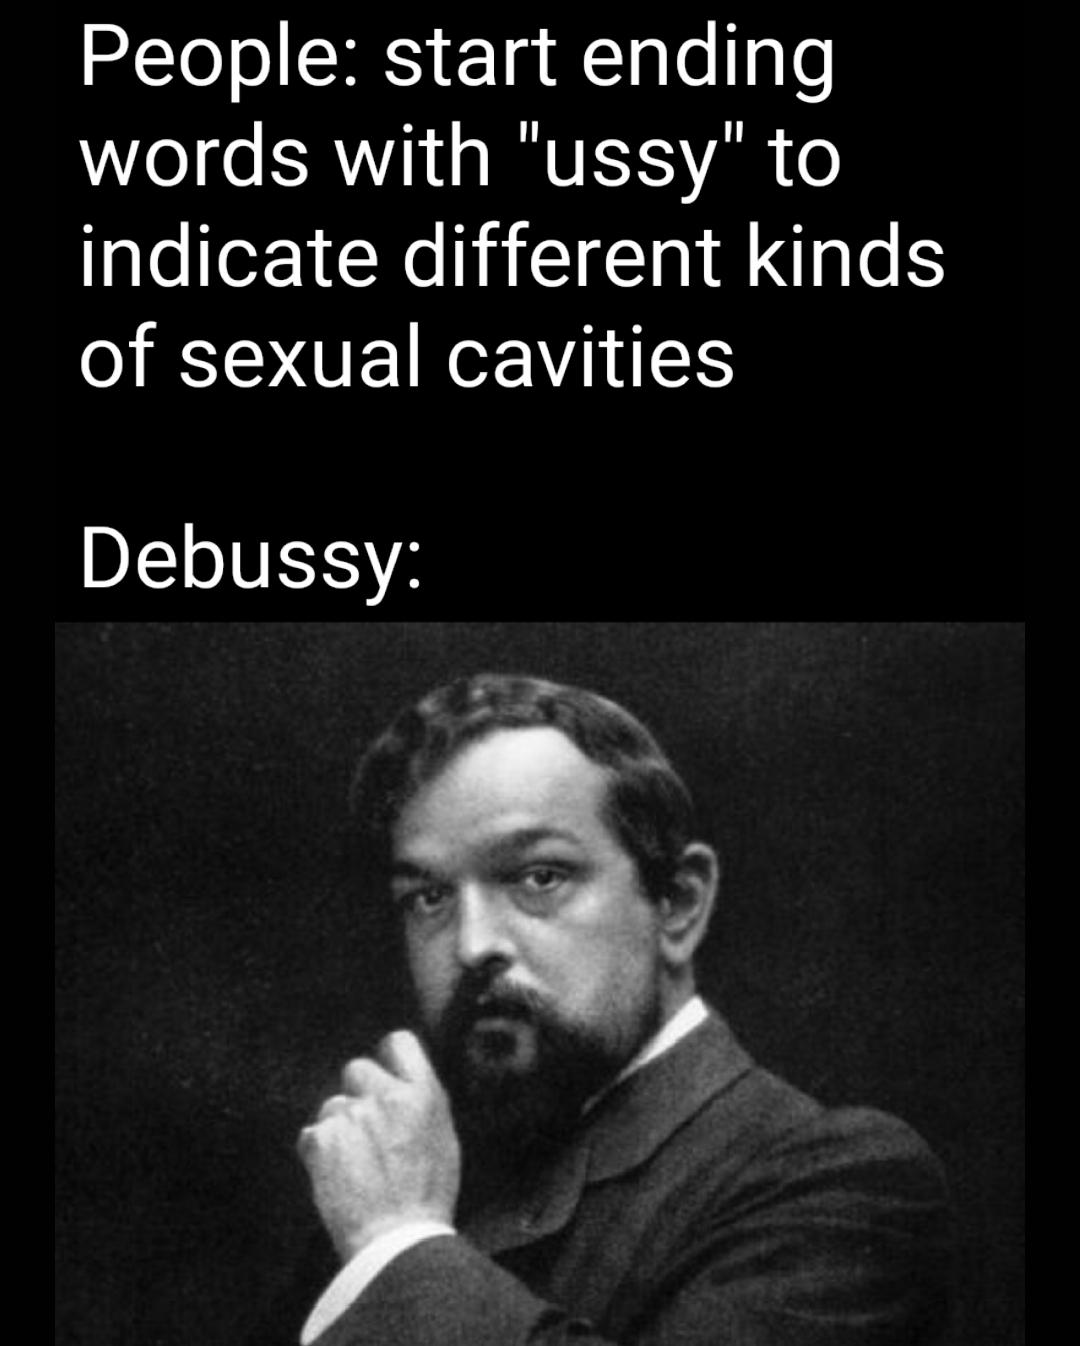 dank memes - cluade debussy - People start ending words with "ussy" to indicate different kinds of sexual cavities Debussy